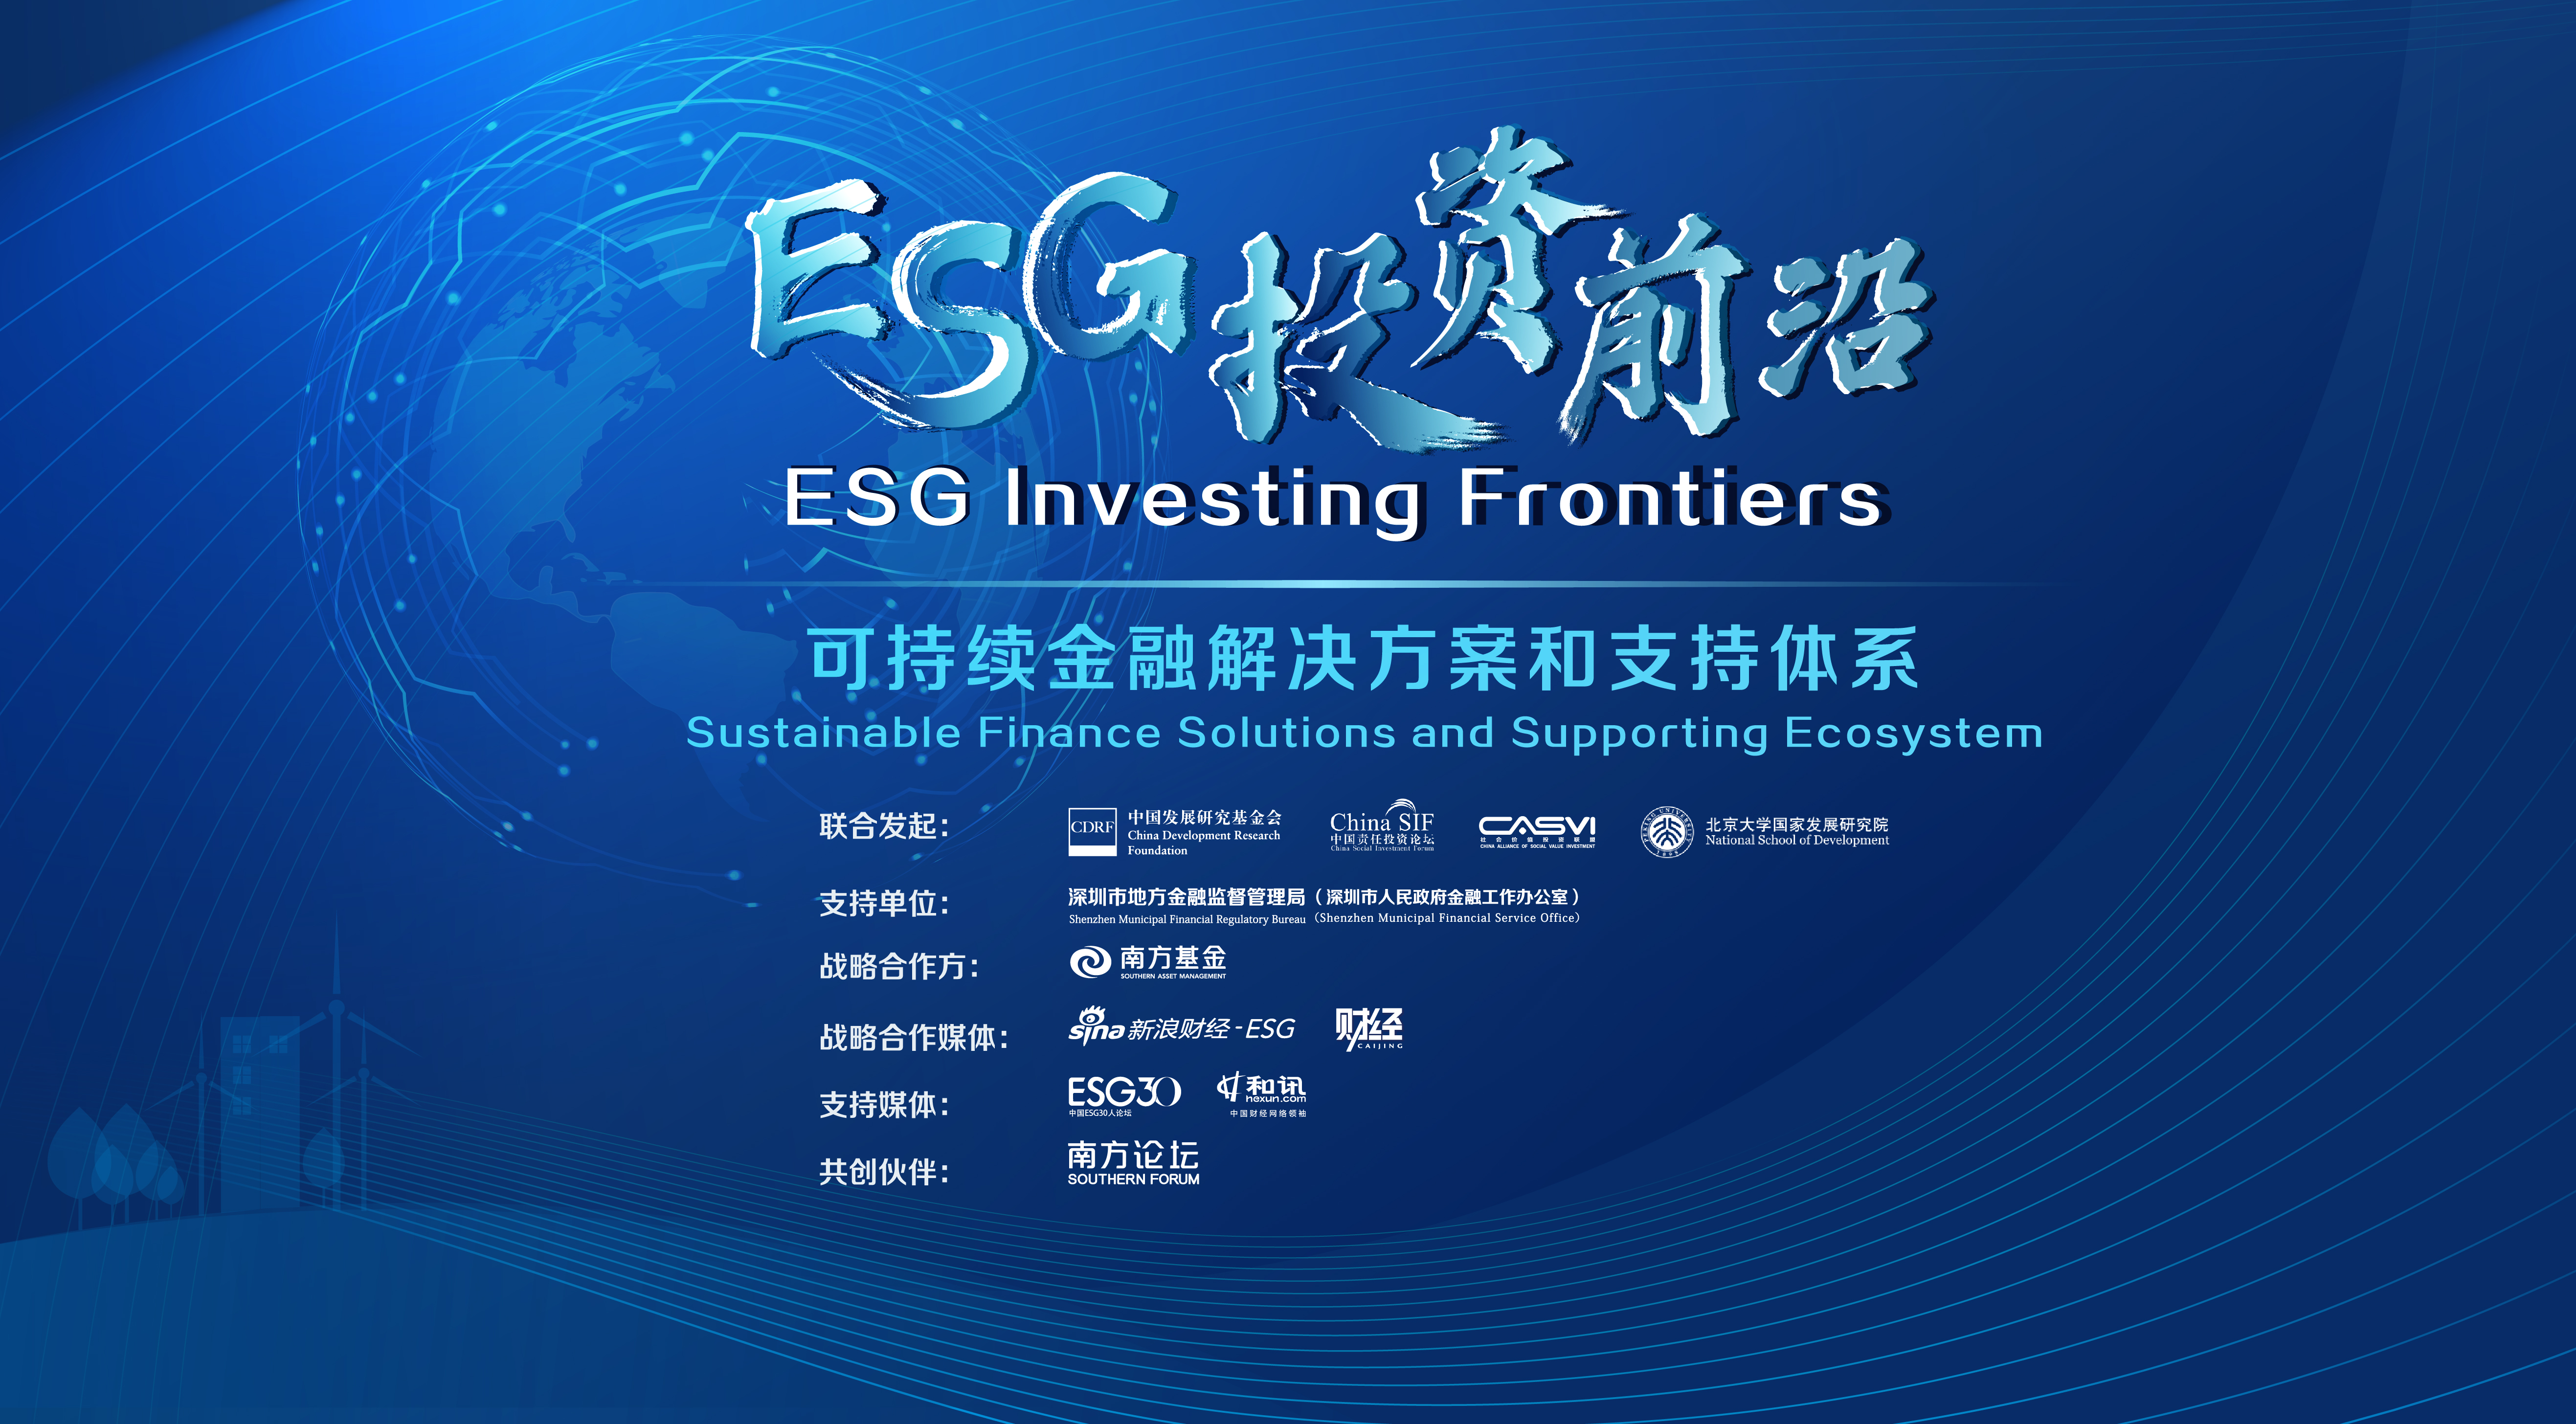 ESG Investing Frontiers Forum | Sustainable Finance Solutions and Supporting Ecosystem